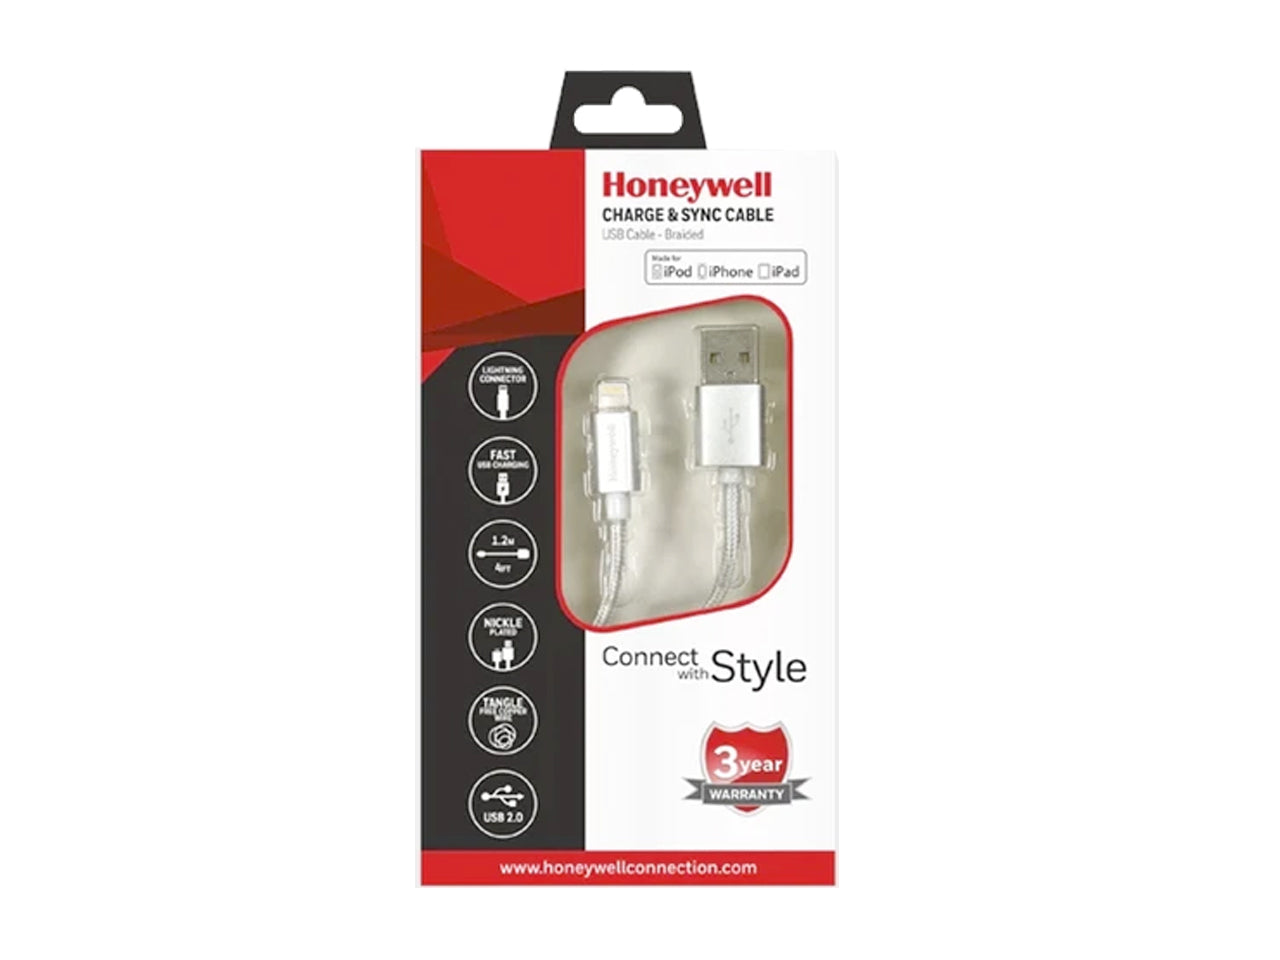 Honeywell Apple Lightning Sync & Charge Cable 1.2 Mtr (Braided) Silver